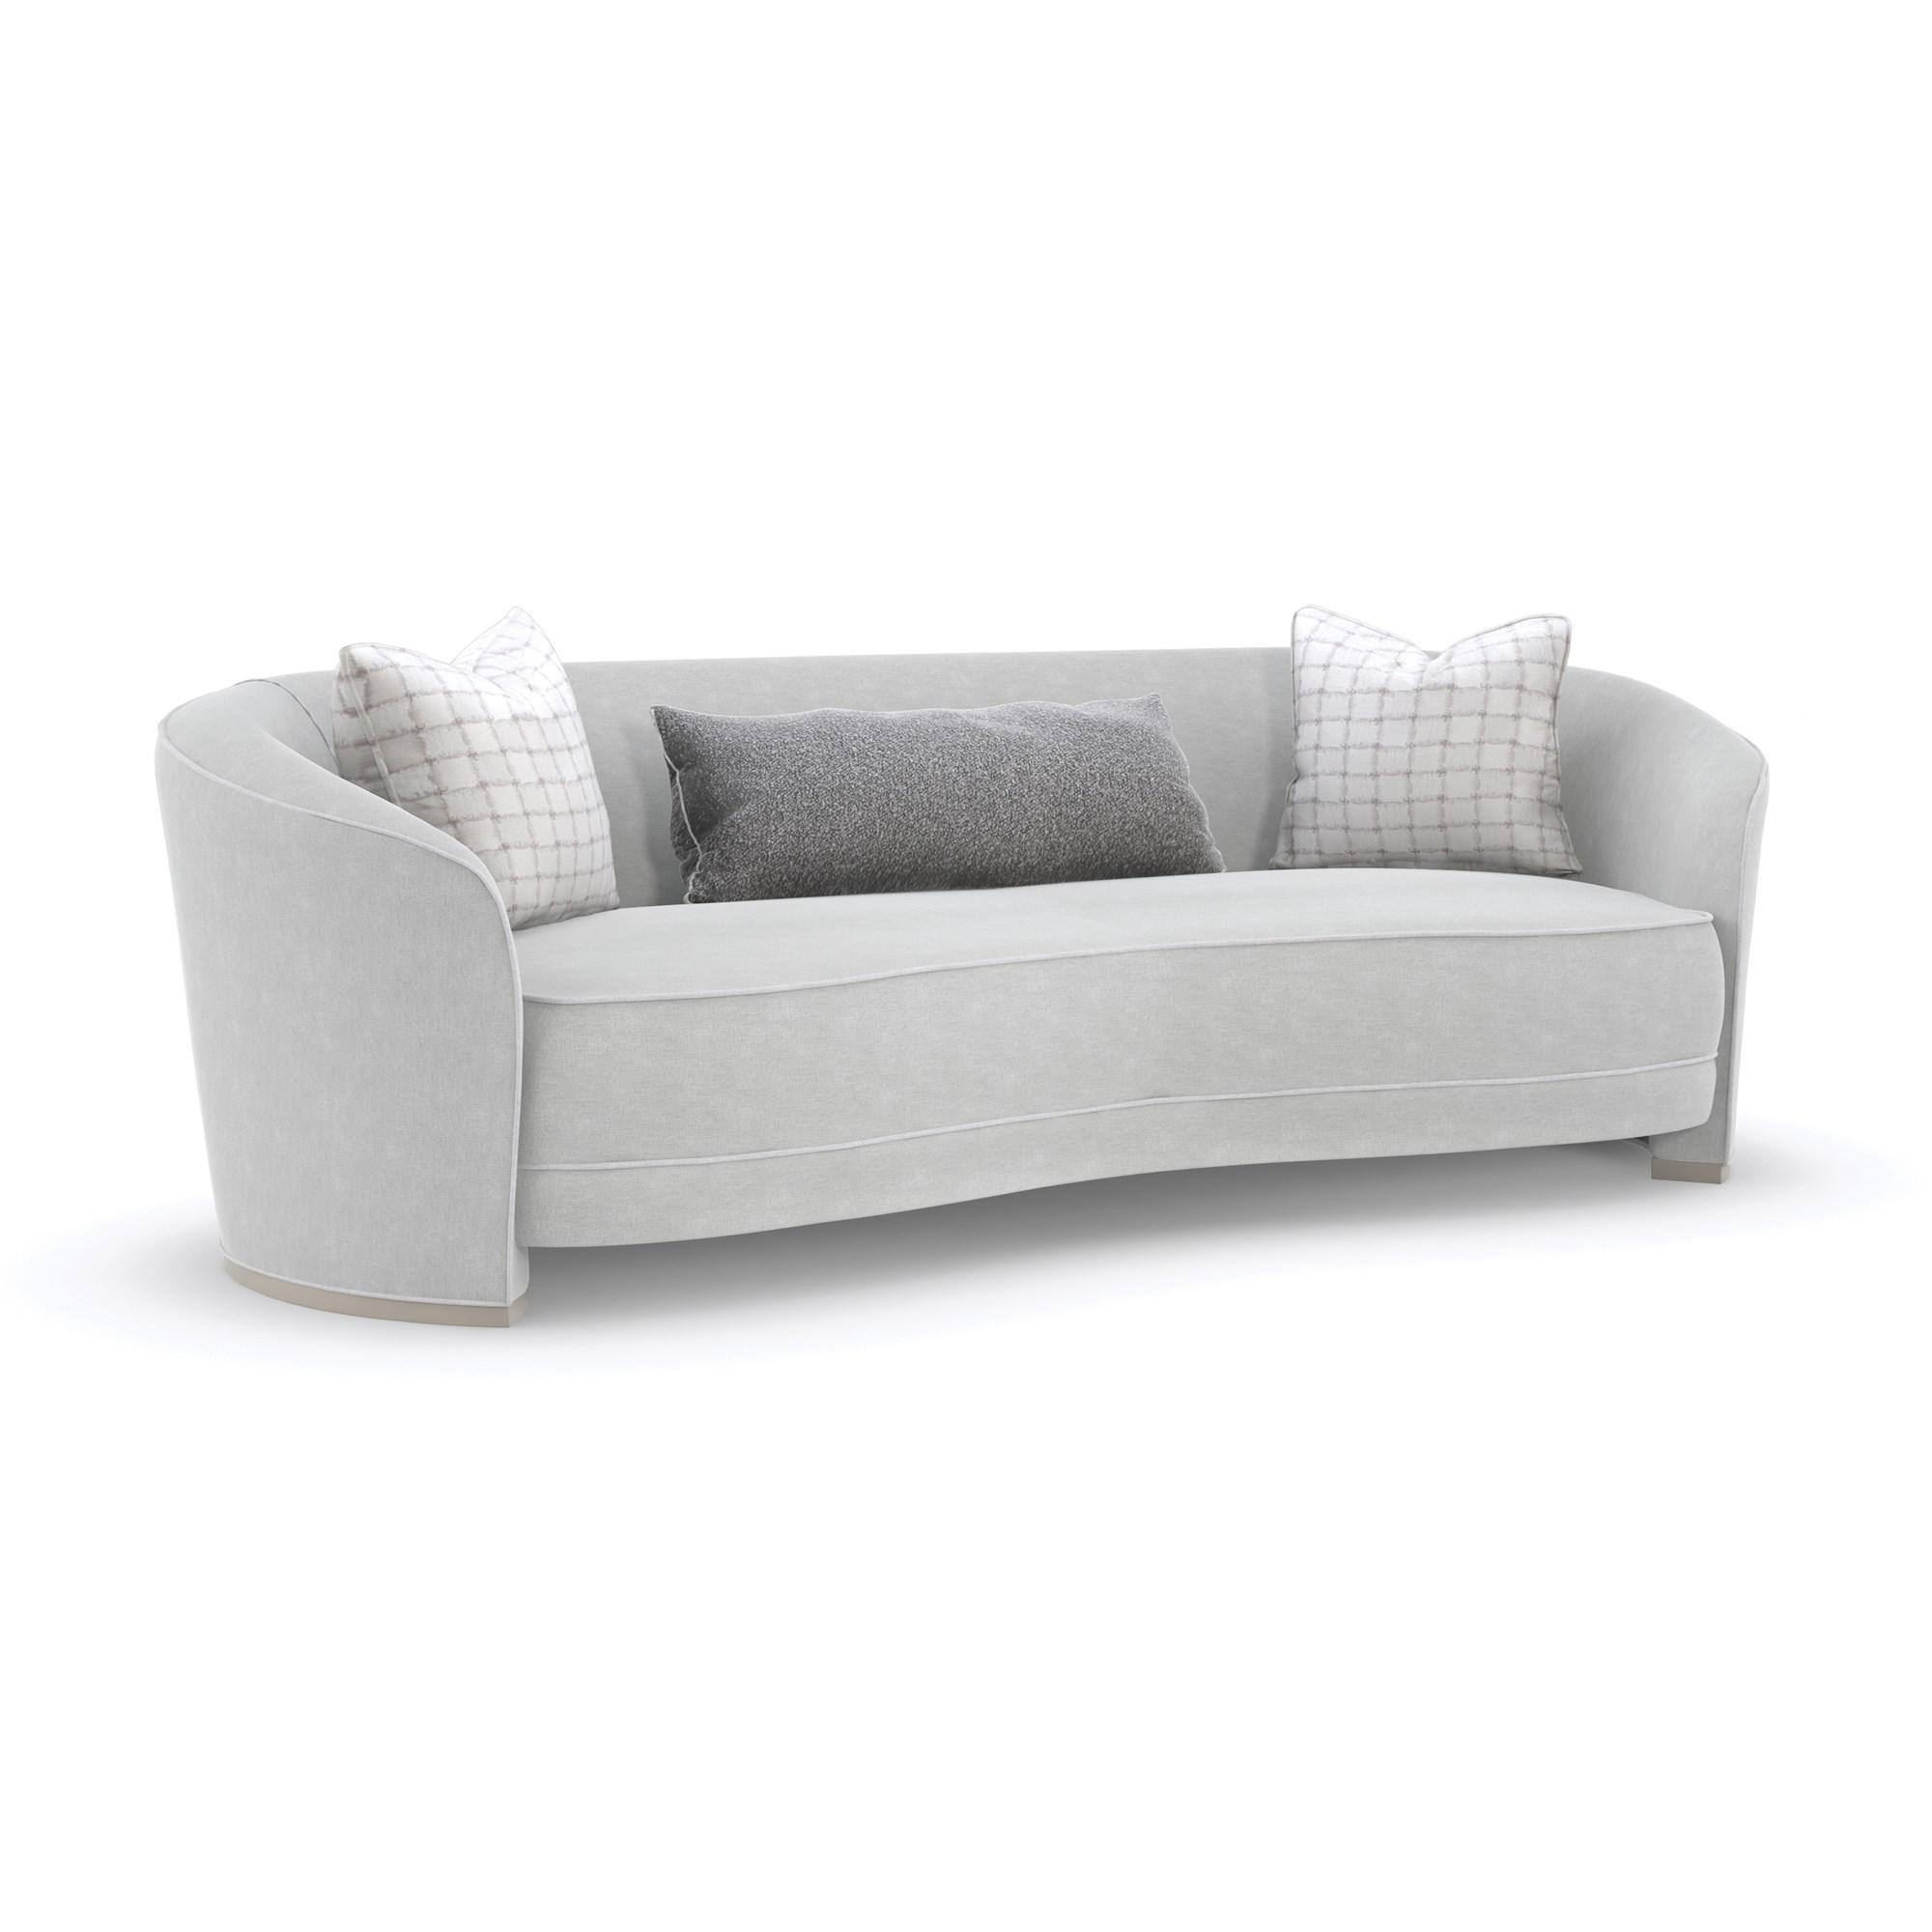 Traditional Sofa AHEAD OF THE CURVE UPH-421-011-A in Light Gray Fabric